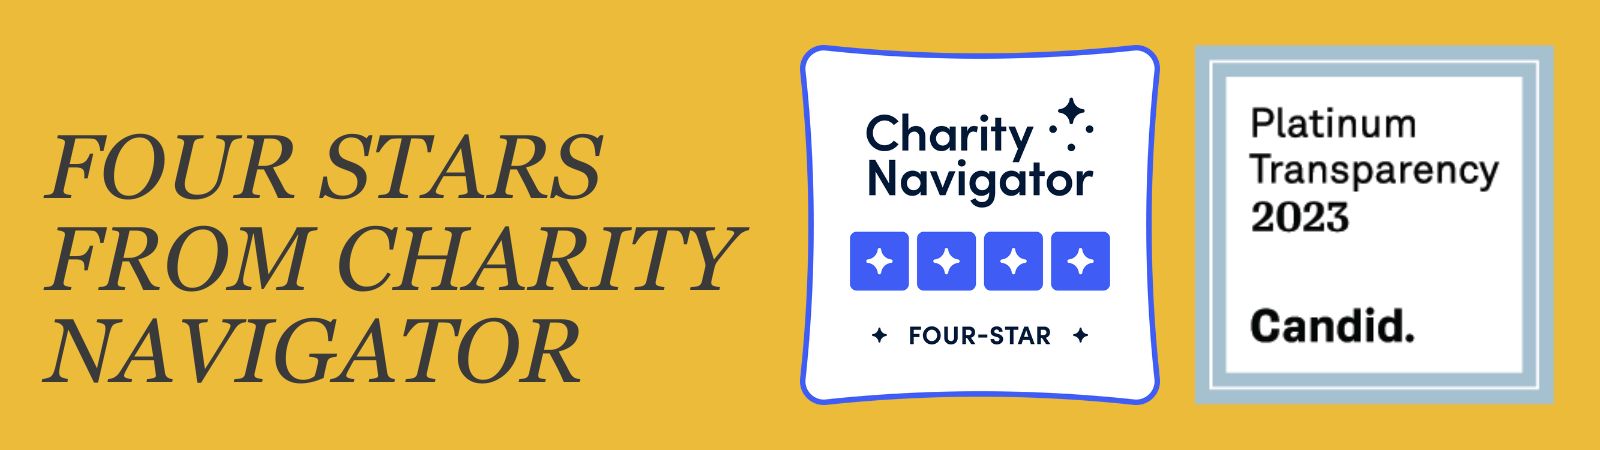 Four Stars from Charity Navigator 